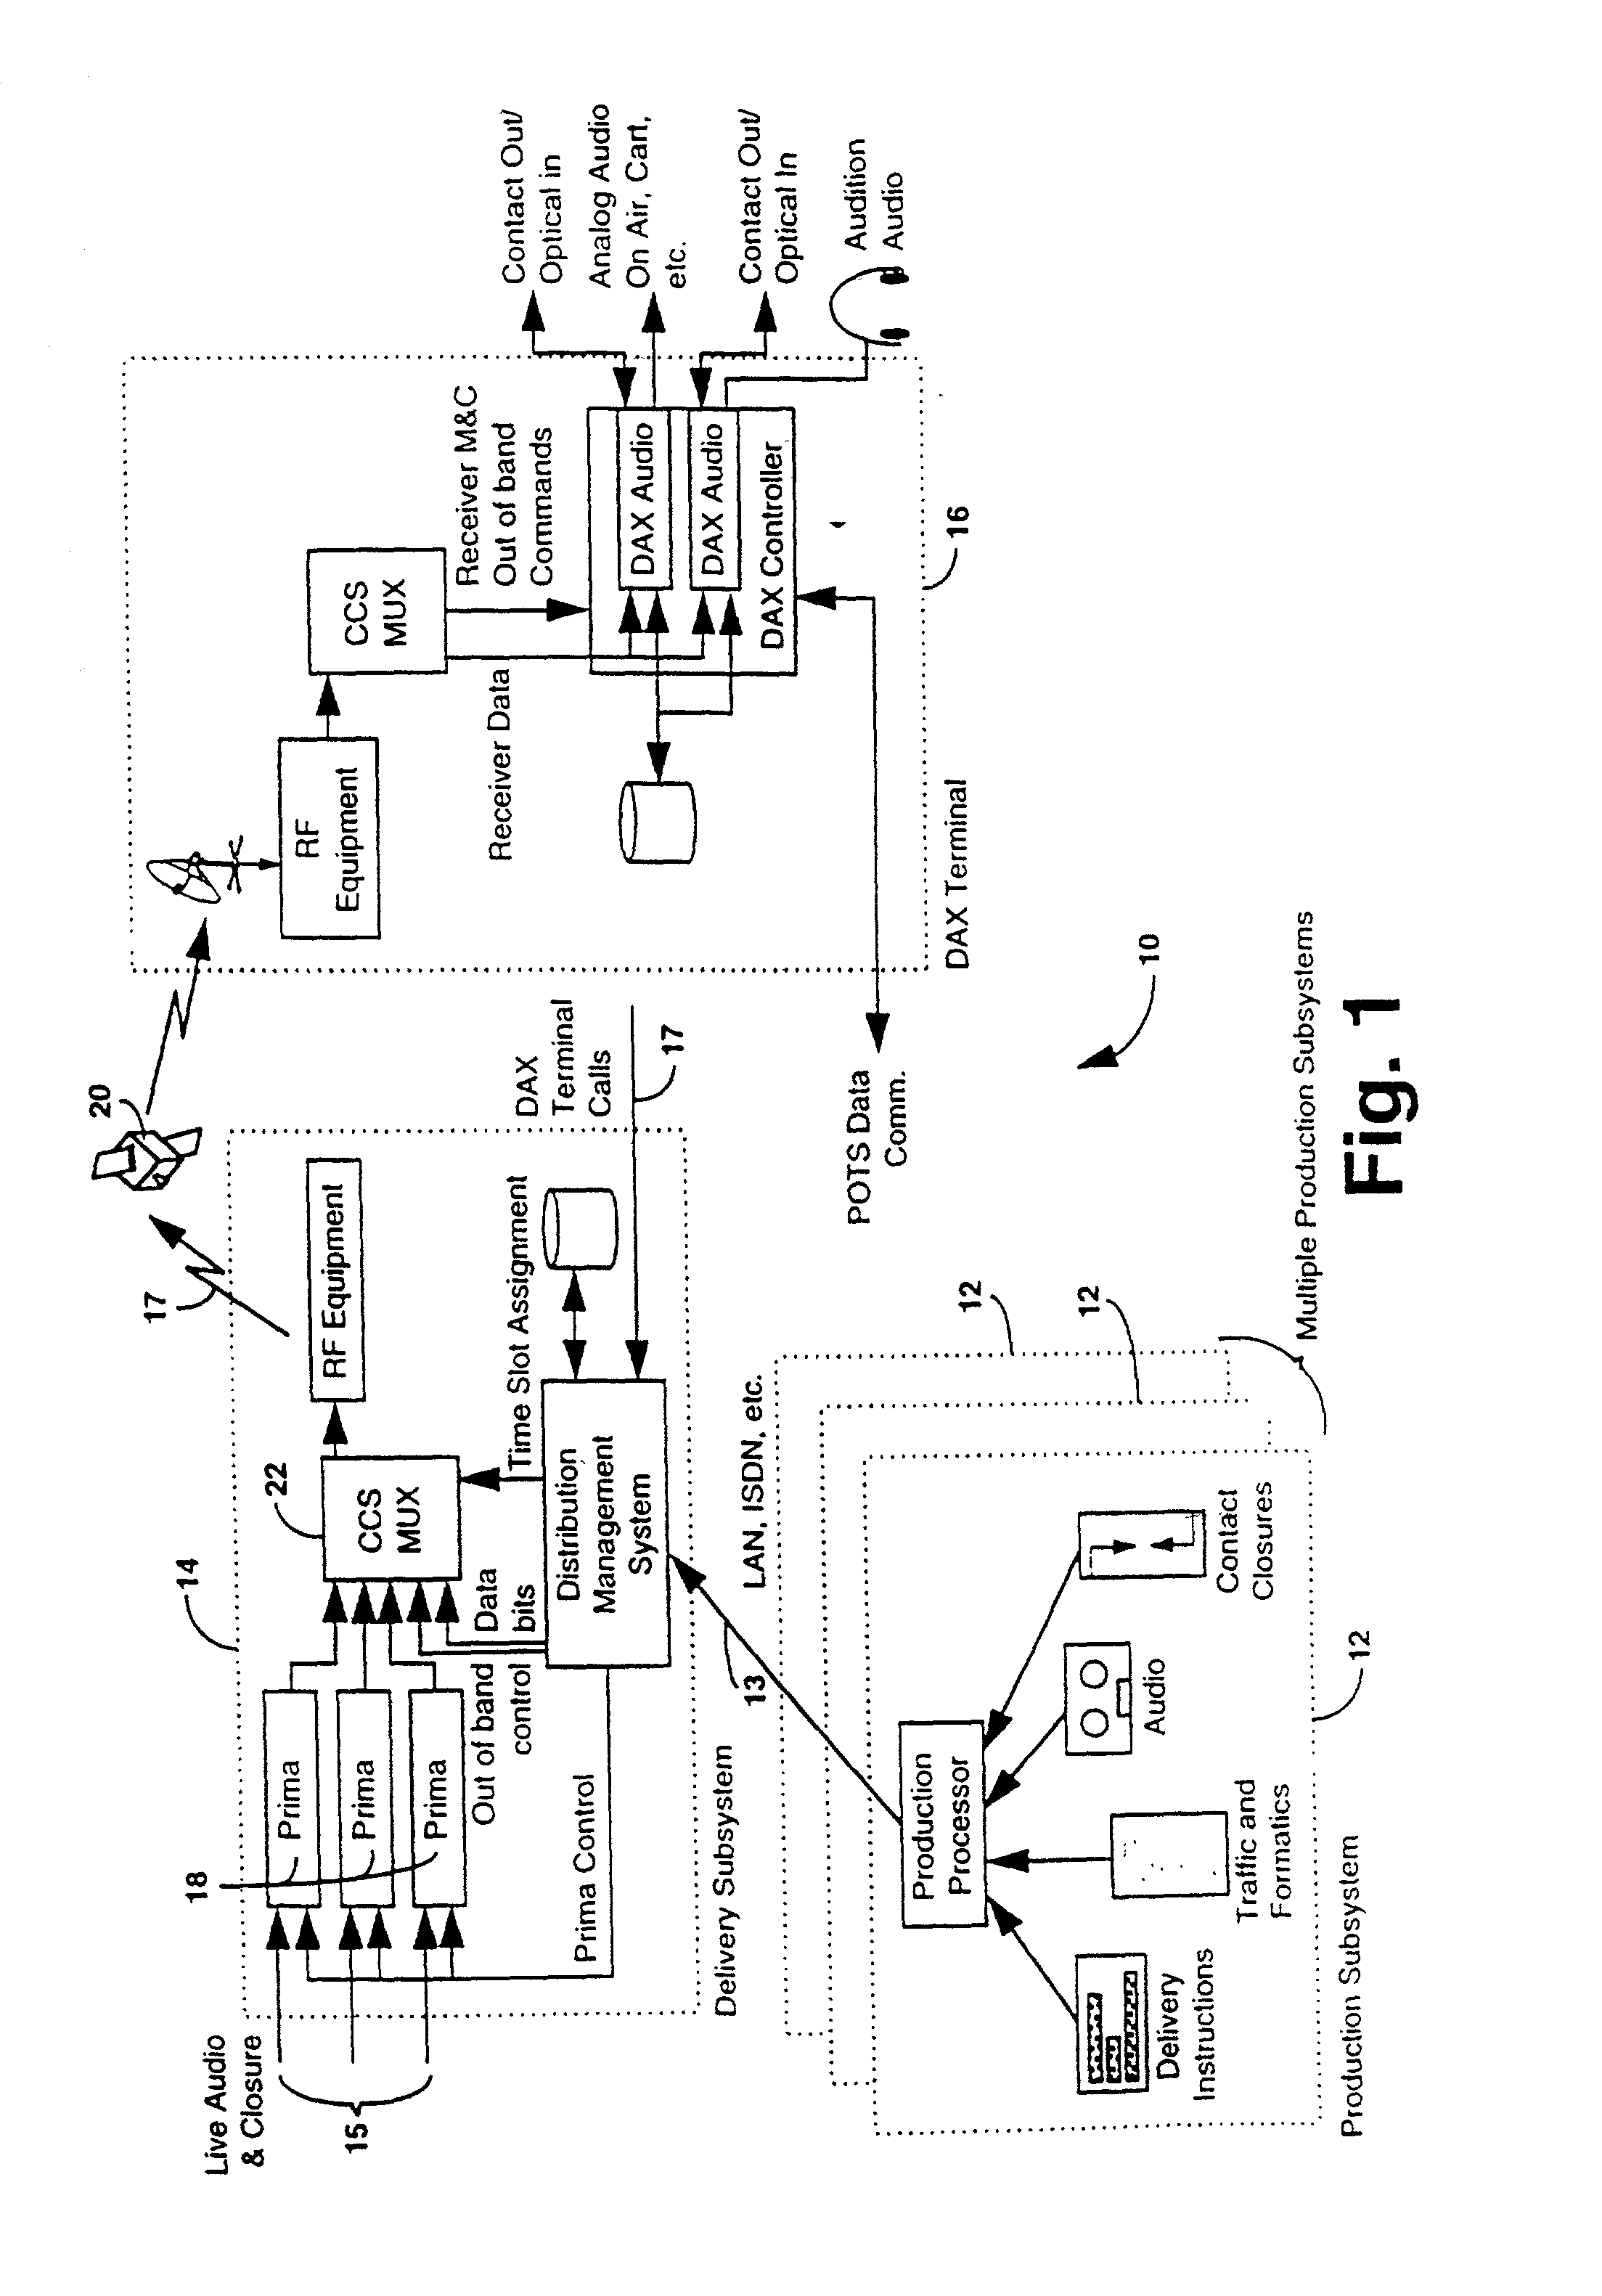 Audio distribution and production system